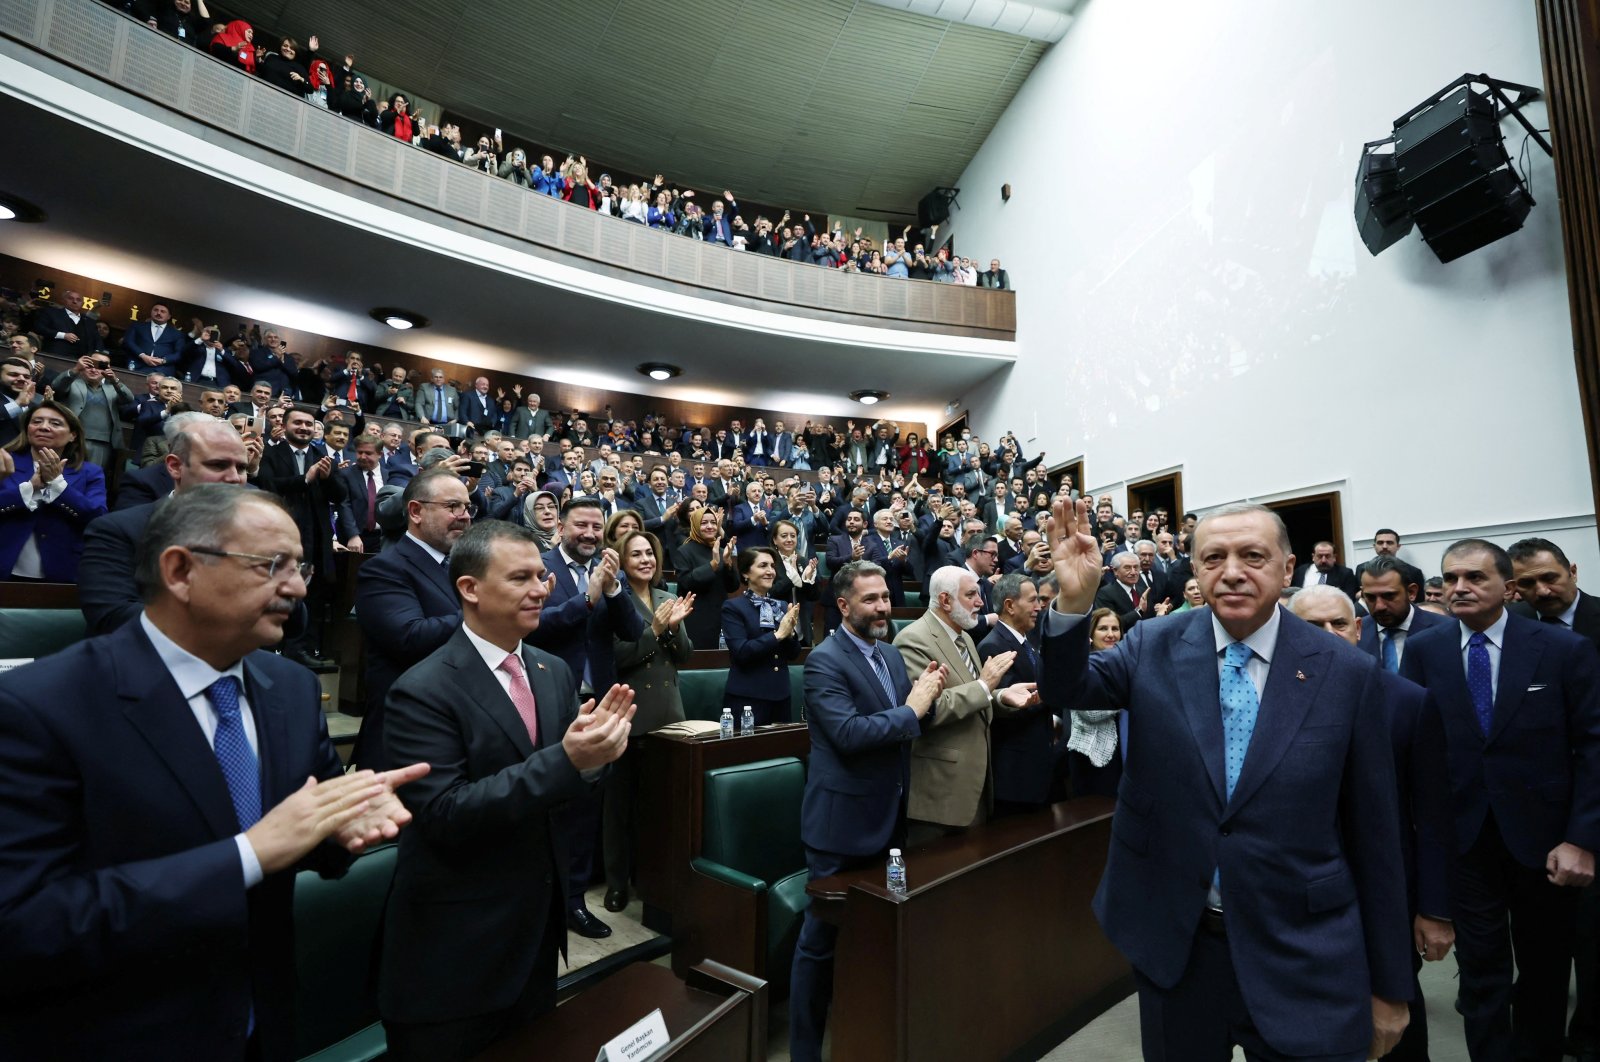 President Recep Tayyip Erdoğan greets Justice and Development Party (AK Party) lawmakers and supporters at a meeting at Parliament in the capital Ankara, Türkiye, Jan. 18, 2023. (Reuters Photo)